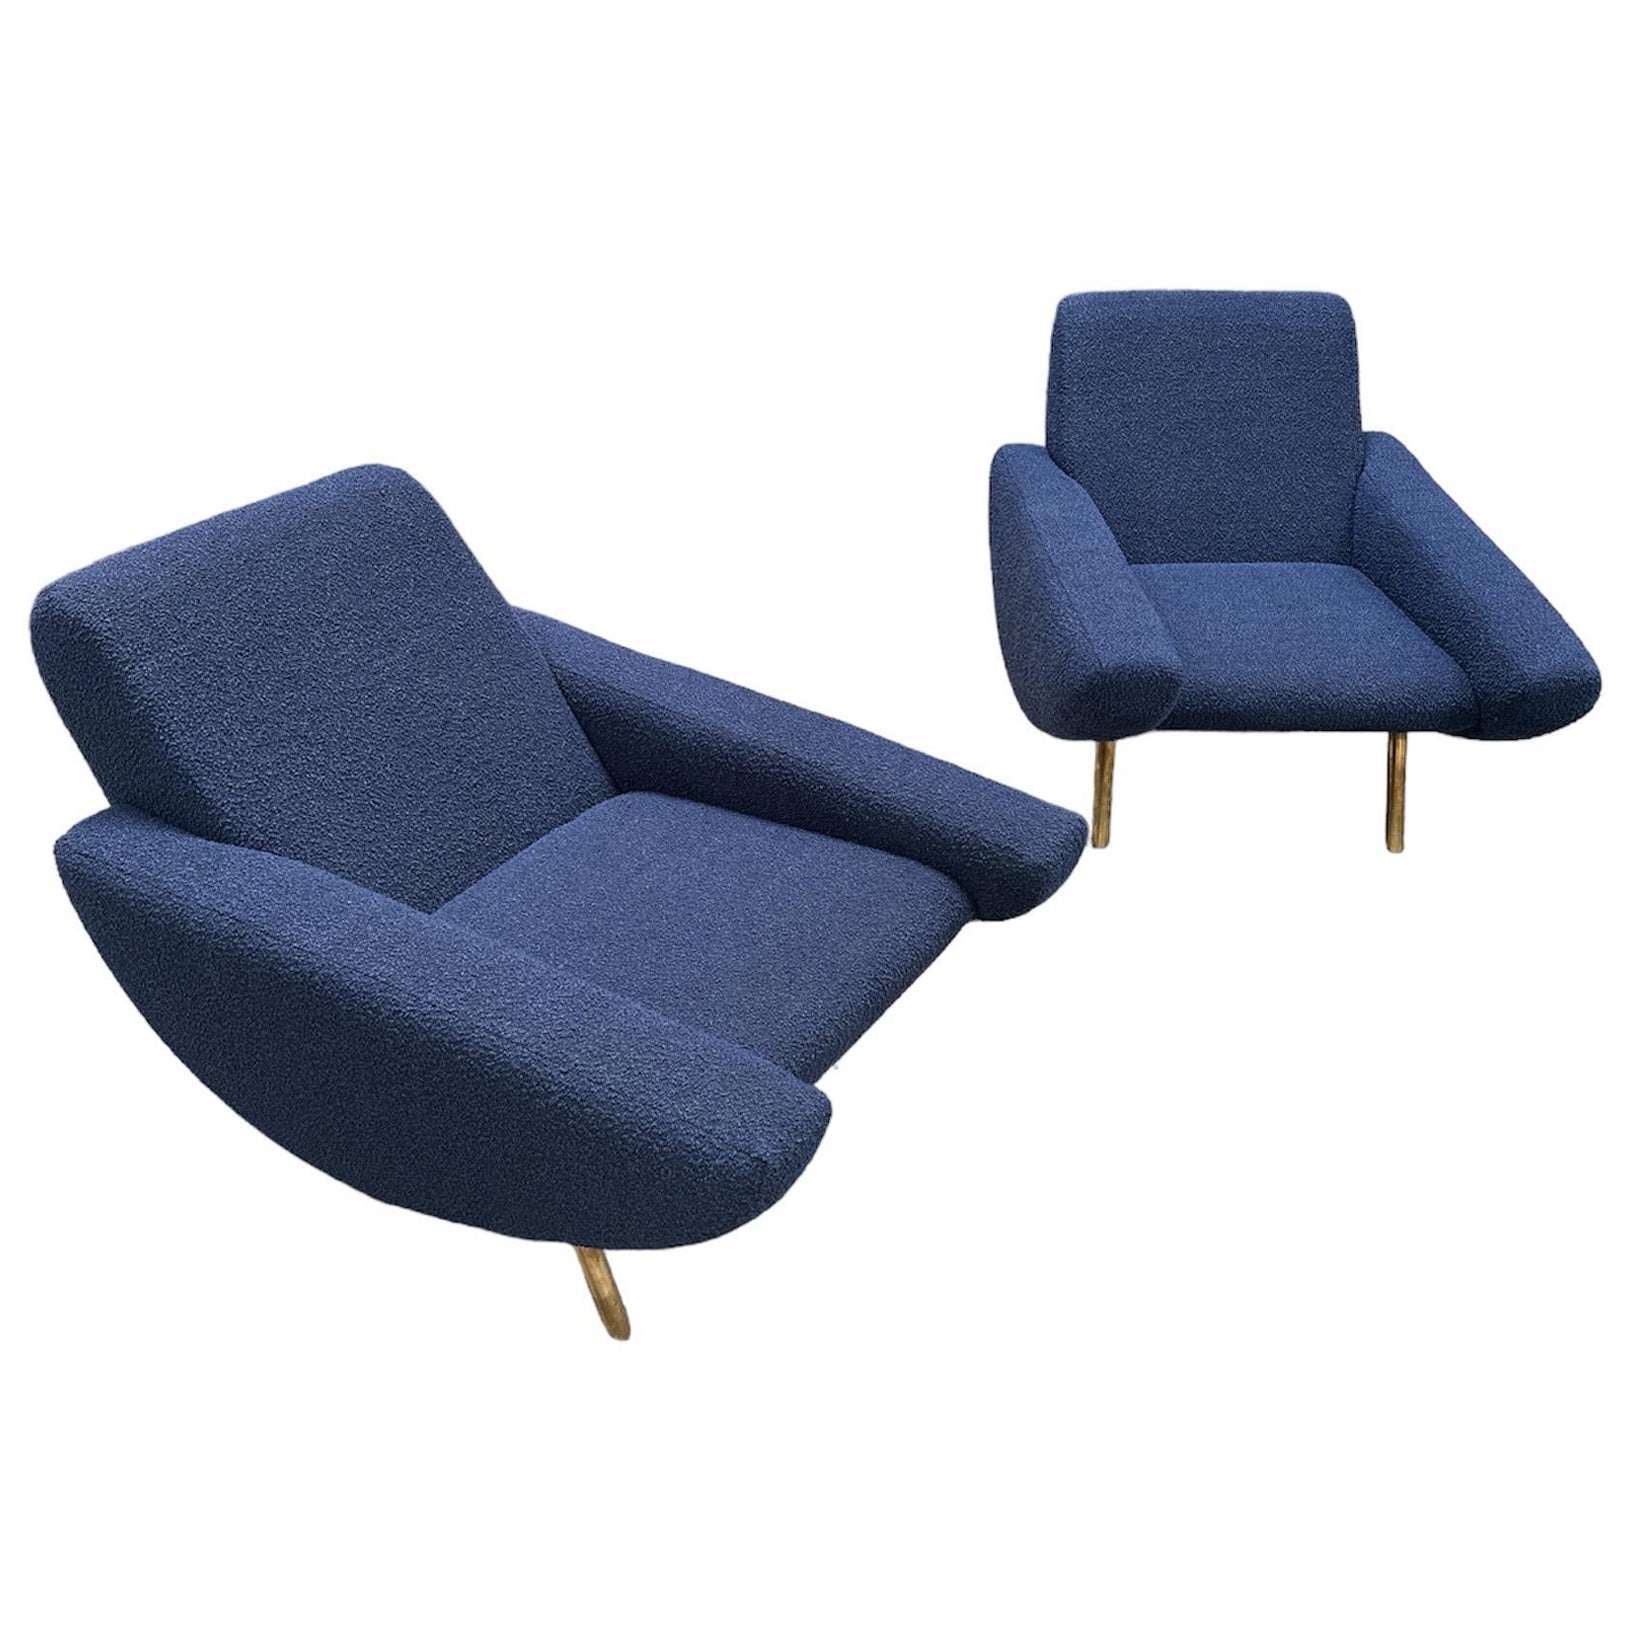 Pair of 2 Mid Century Italian Armchairs In Style of Zanuso 1960 For Sale